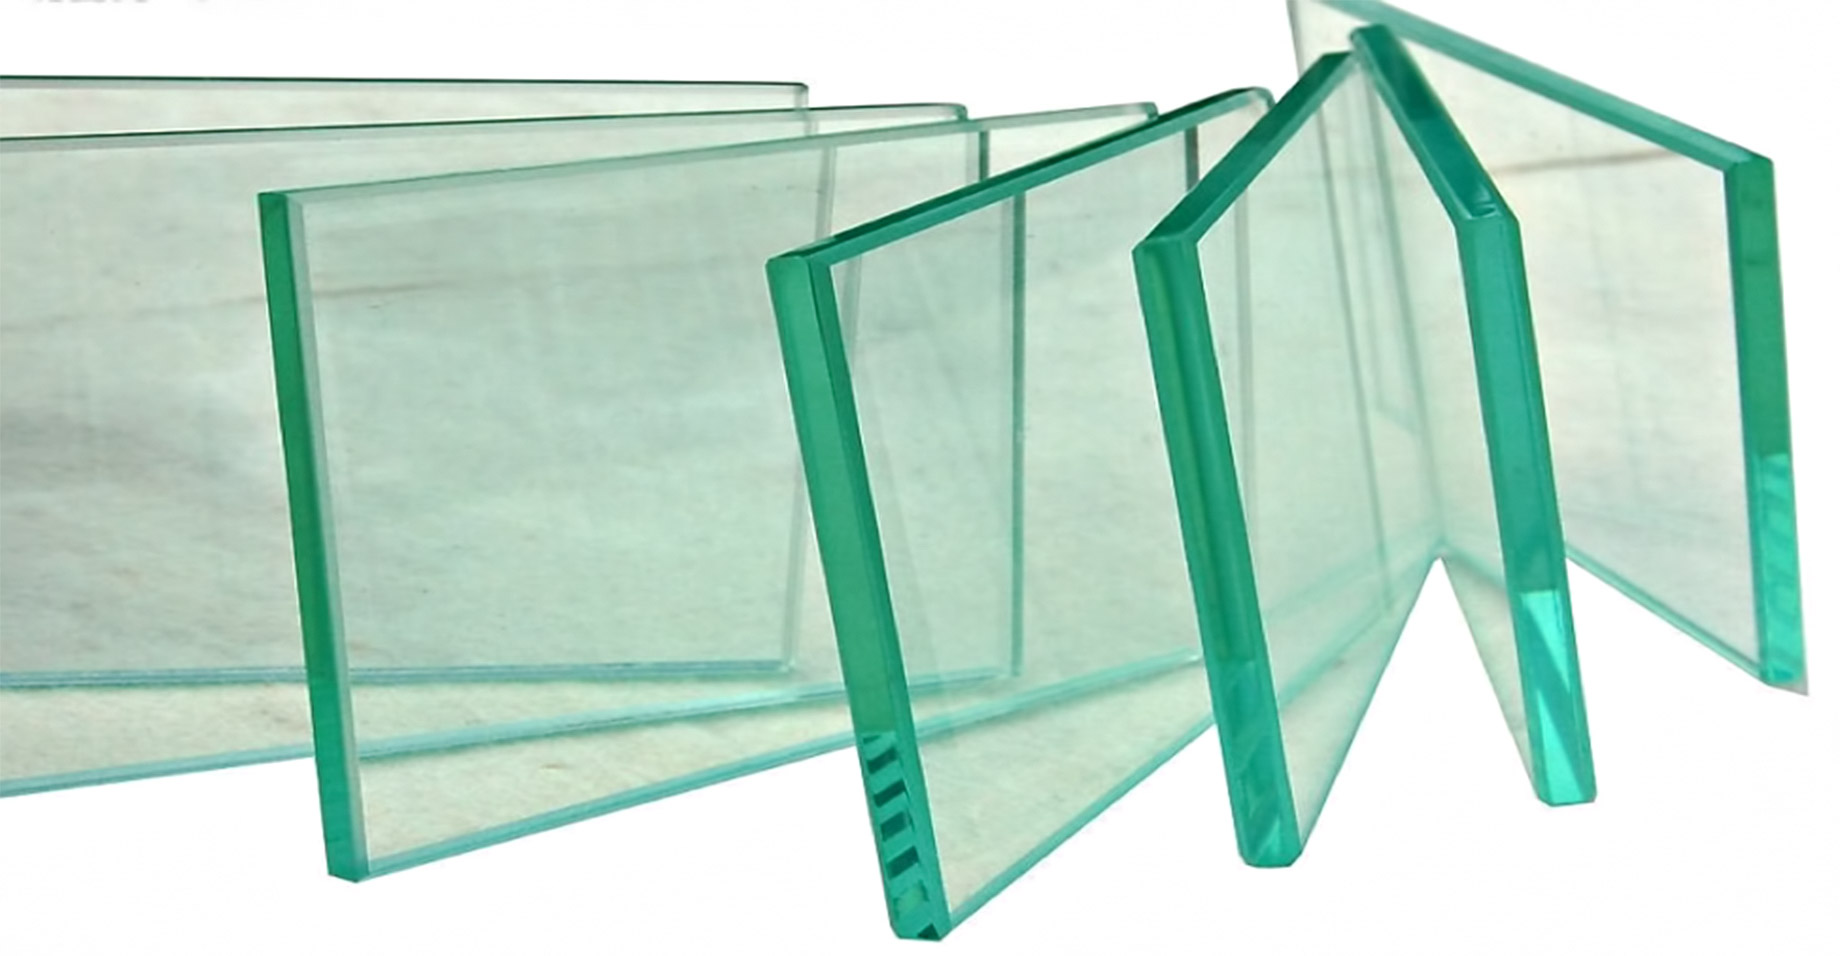 Float Glass - Provides Strength and Toughness To Windows